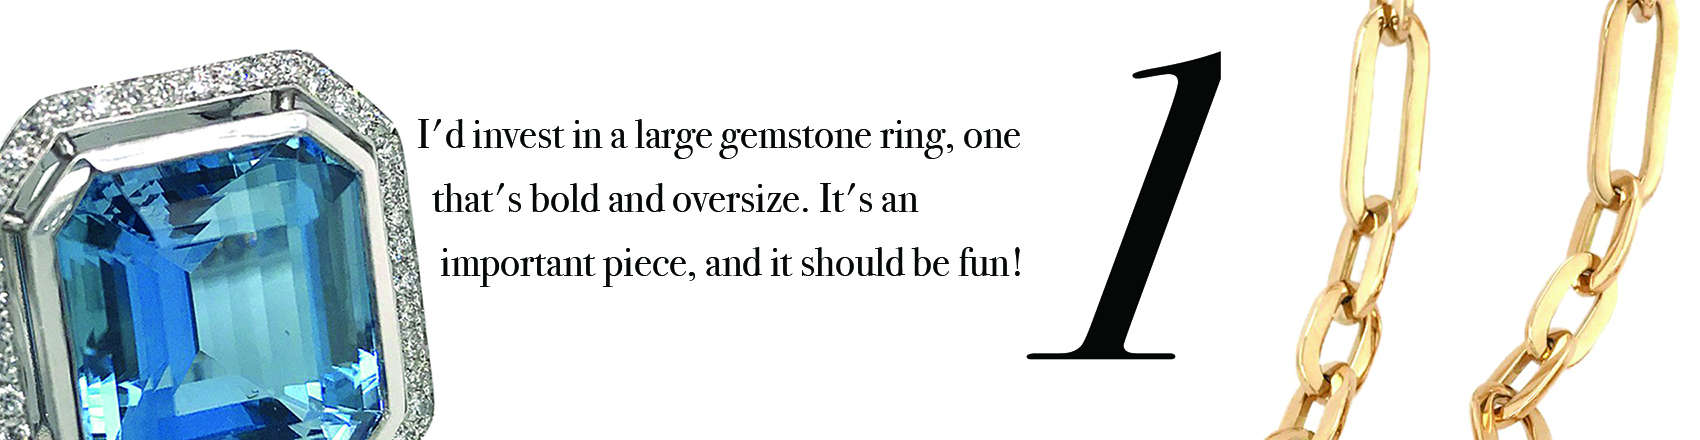 Your Jewelry Wardrobe Tip #1: I'd invest in a large gemstone ring, one that's bold and oversize. It's an important piece, and it should be fun!